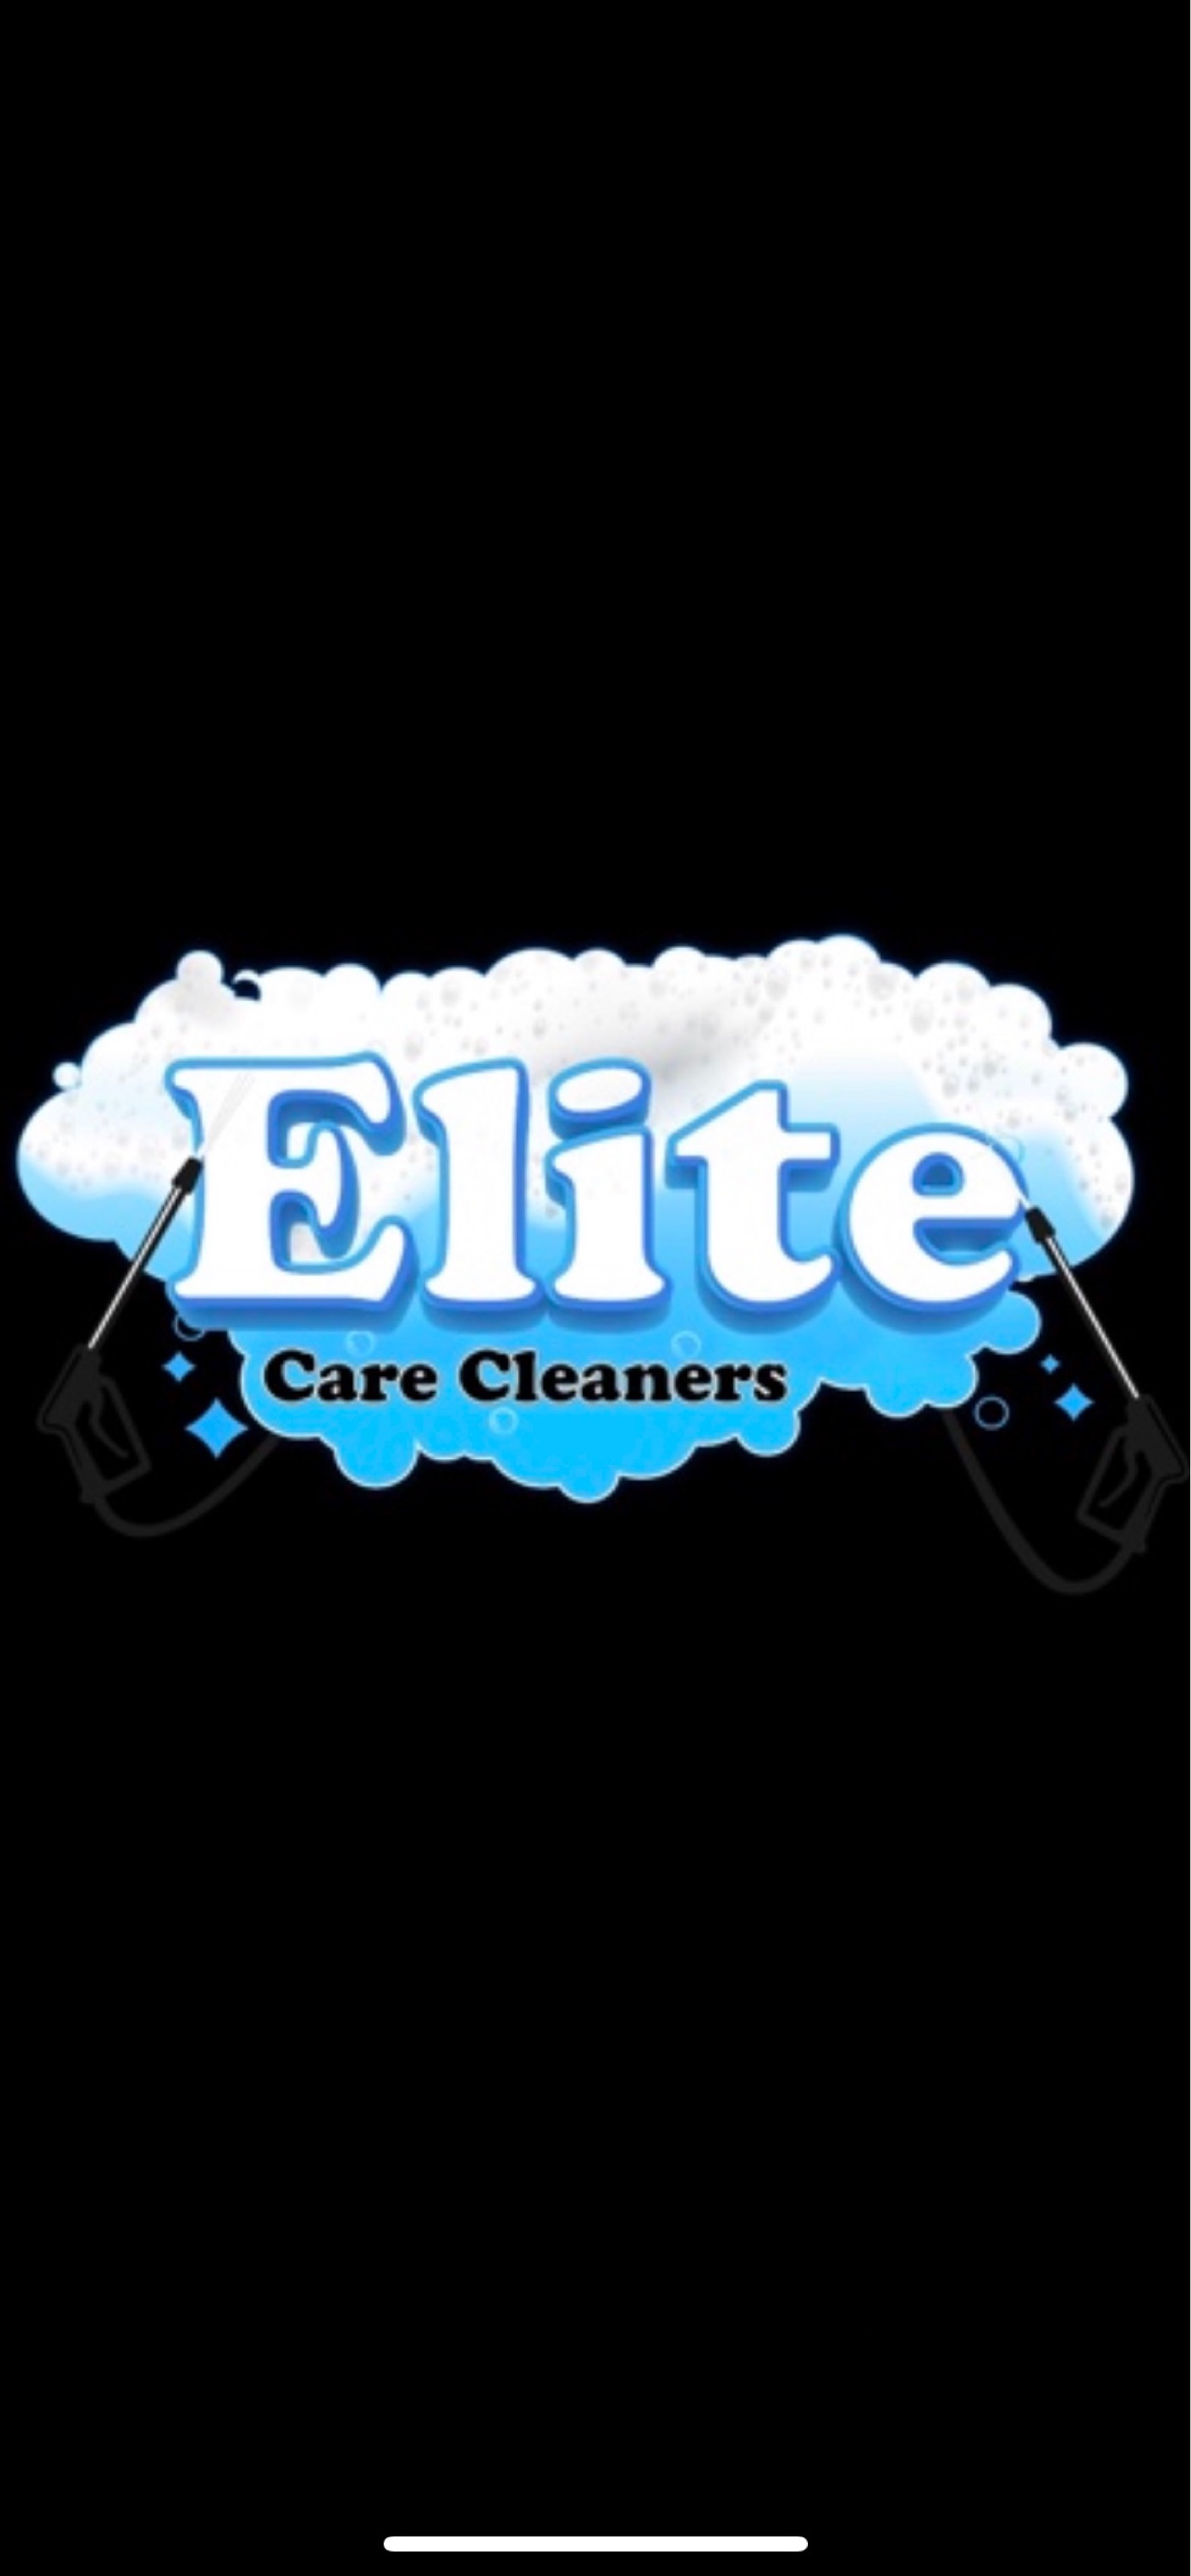 Elite Care Cleaners Logo